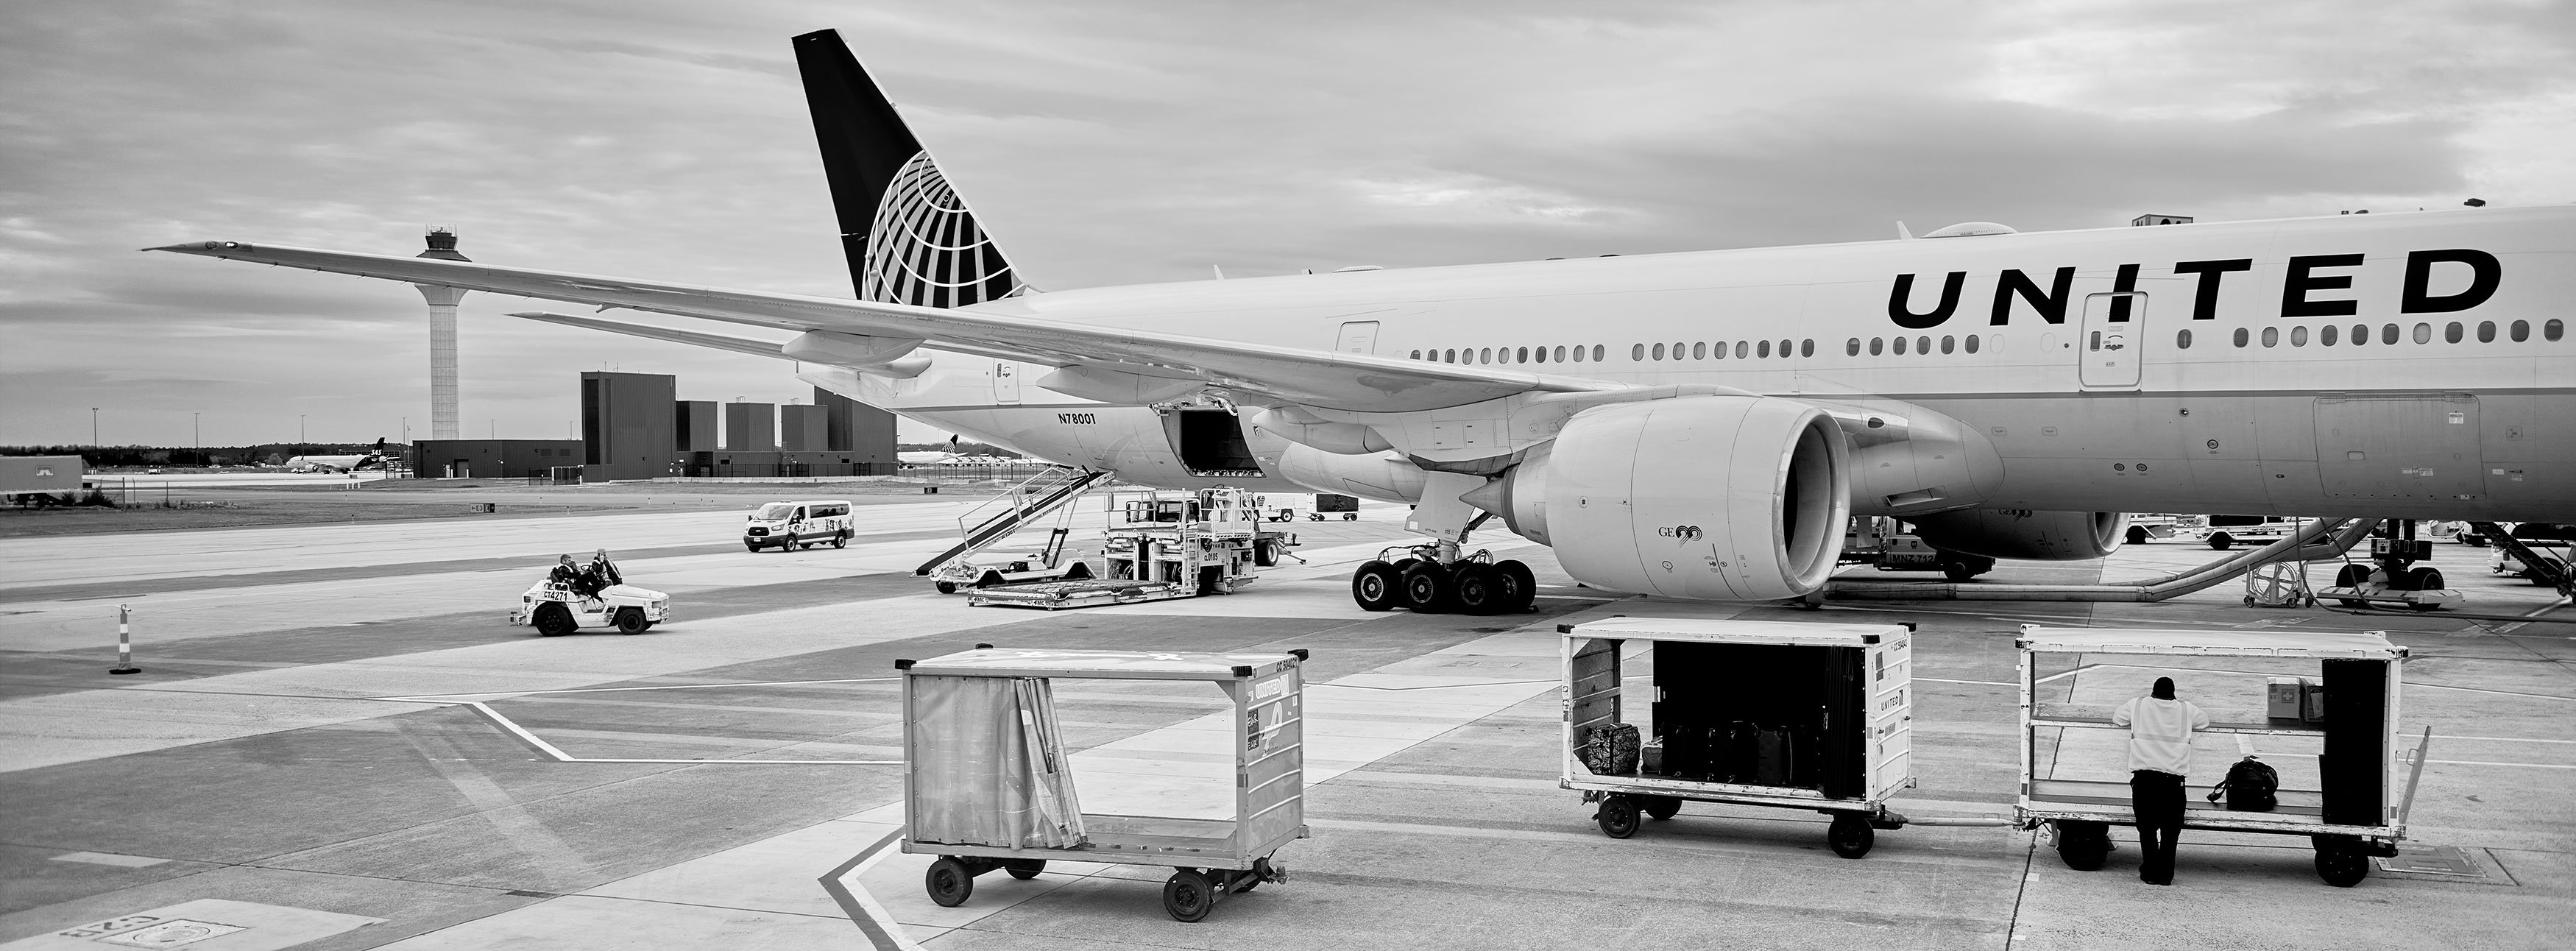 Travel_PANO_GS_202204_M1000521_BW_3500px